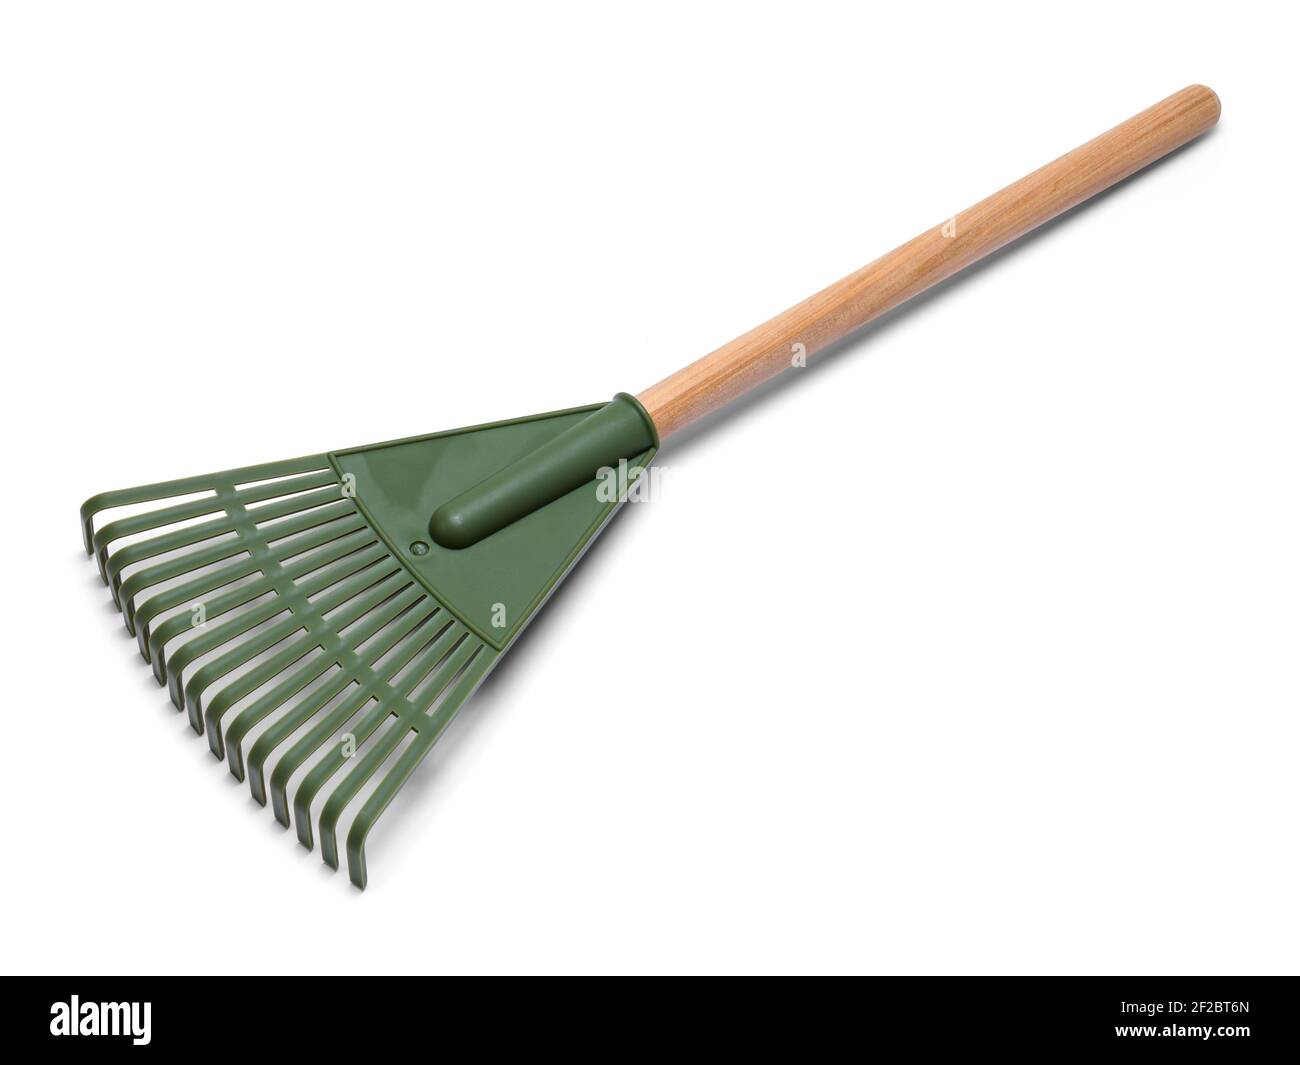 Green Plastic Rake with Wood Handle Cut Out. Stock Photo